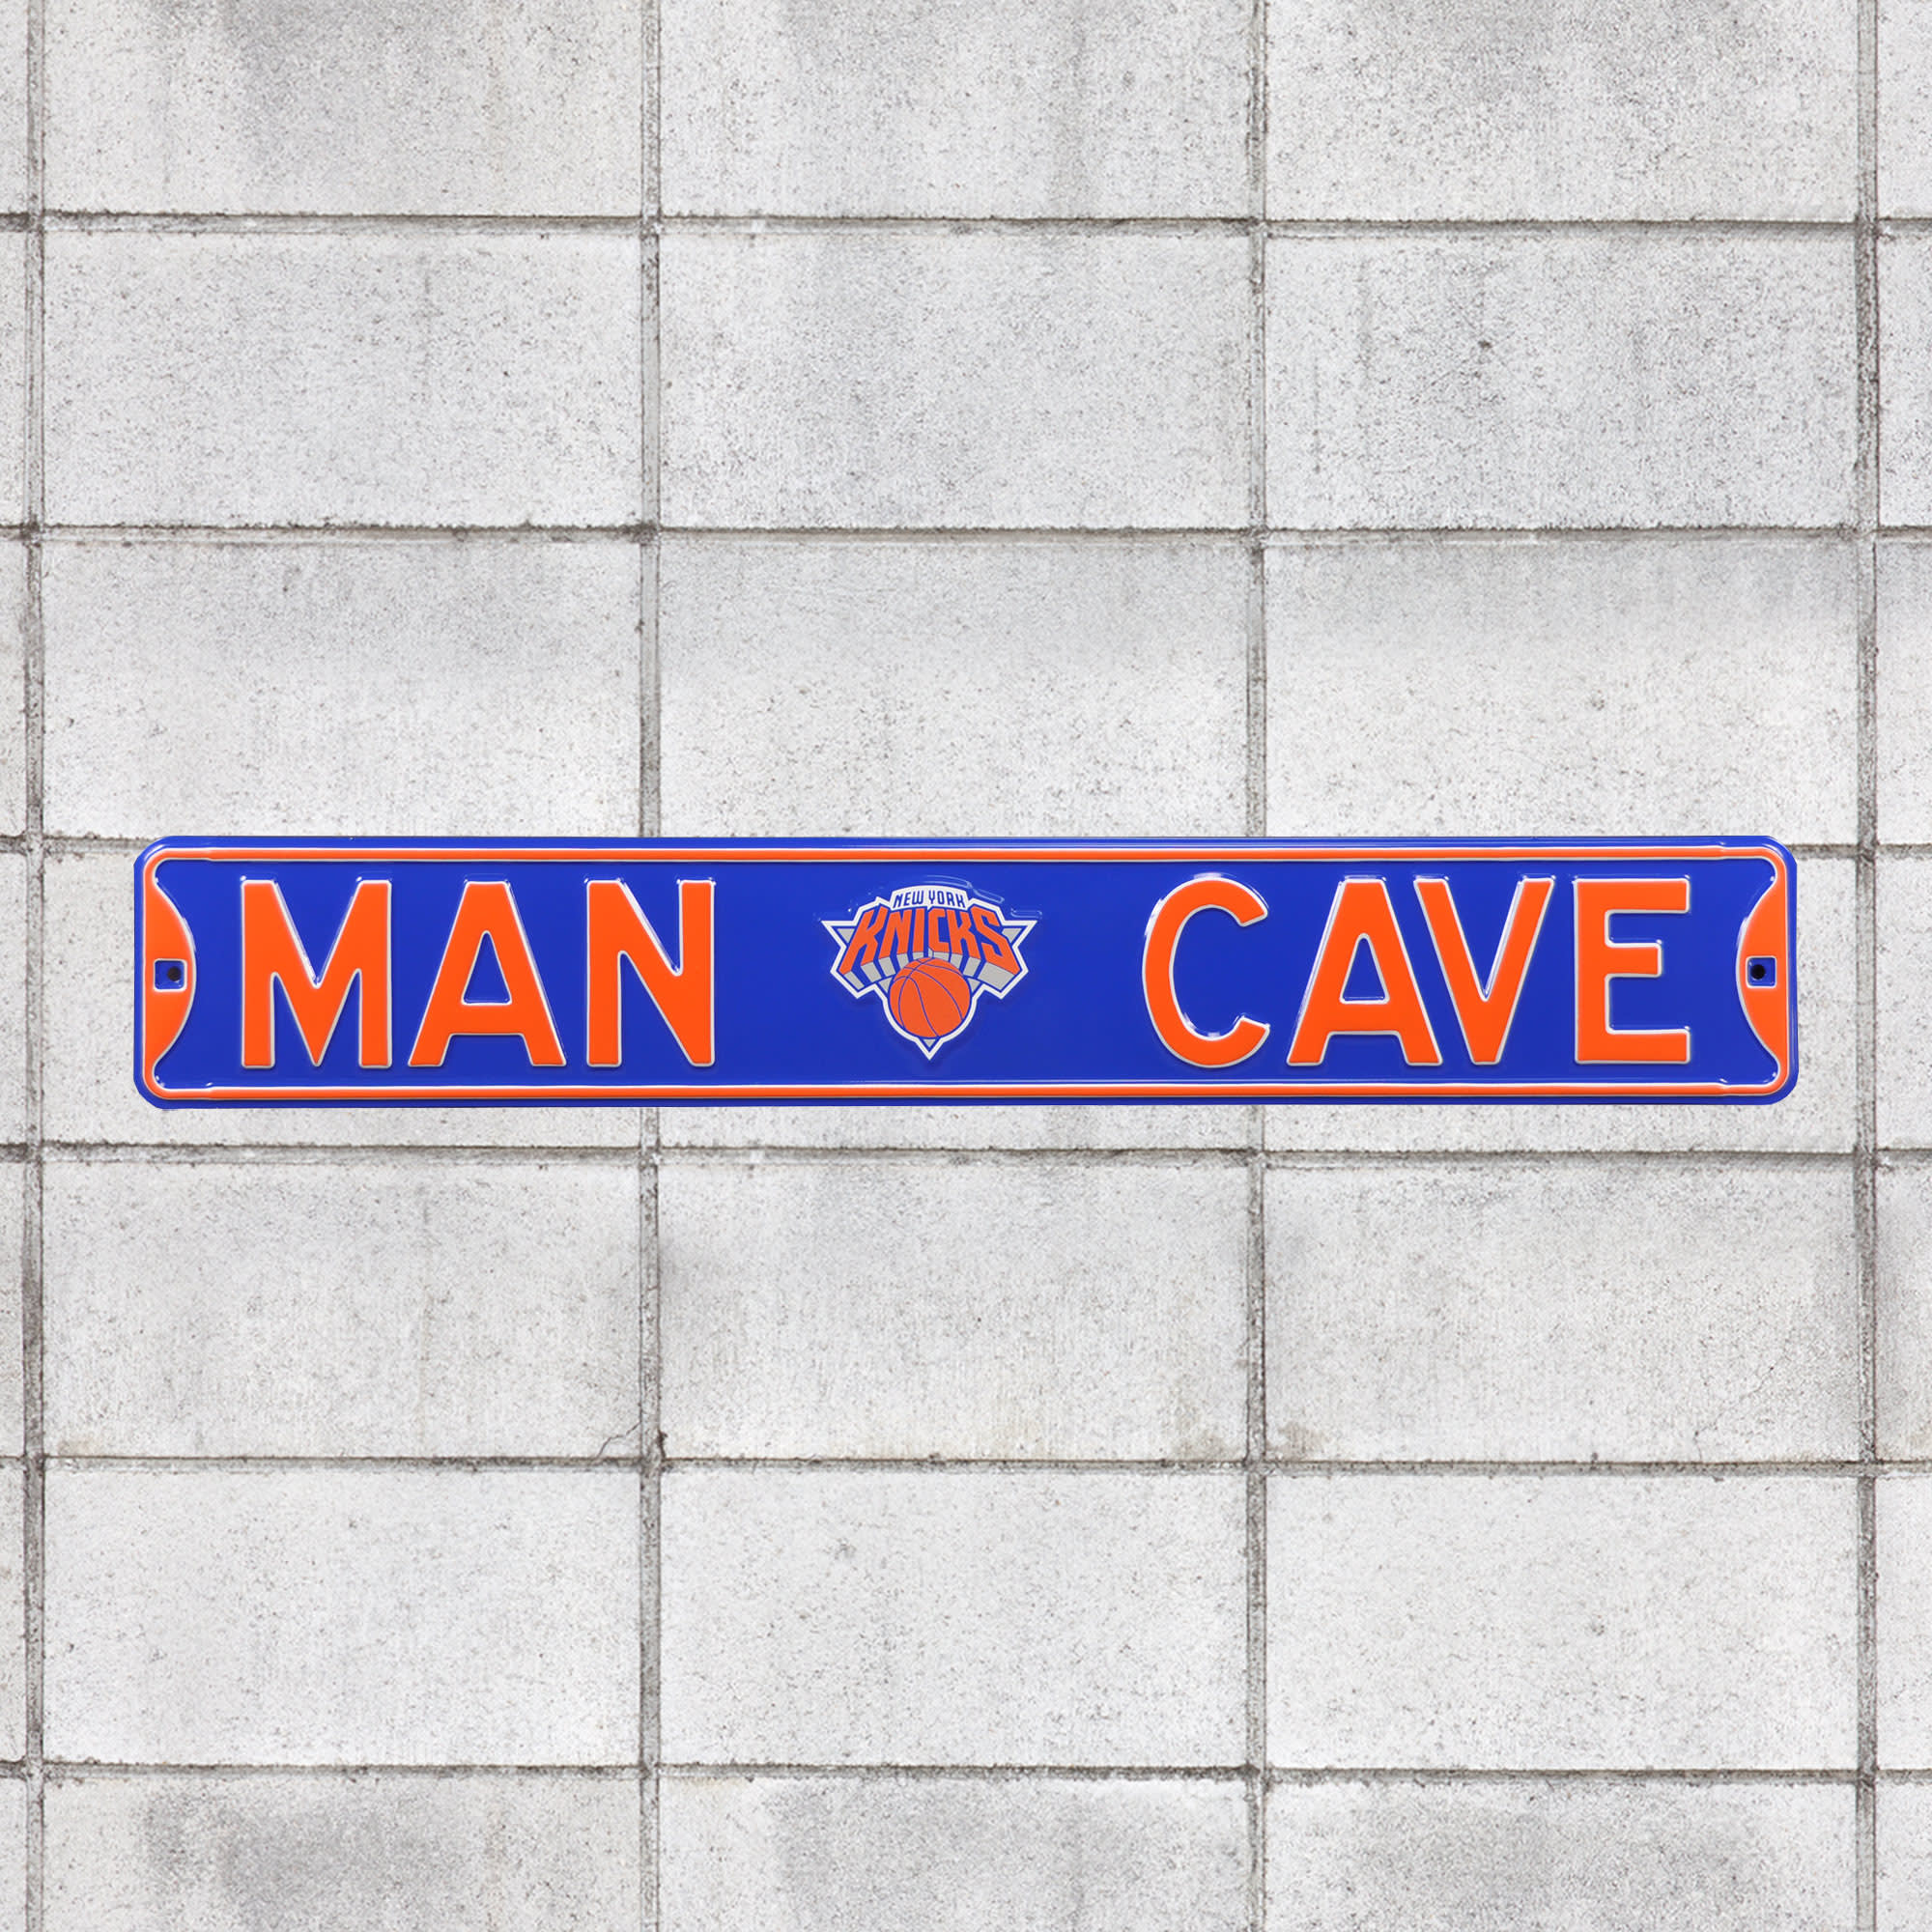 New York Knicks: Man Cave - Officially Licensed NBA Metal Street Sign 36.0"W x 6.0"H by Fathead | 100% Steel